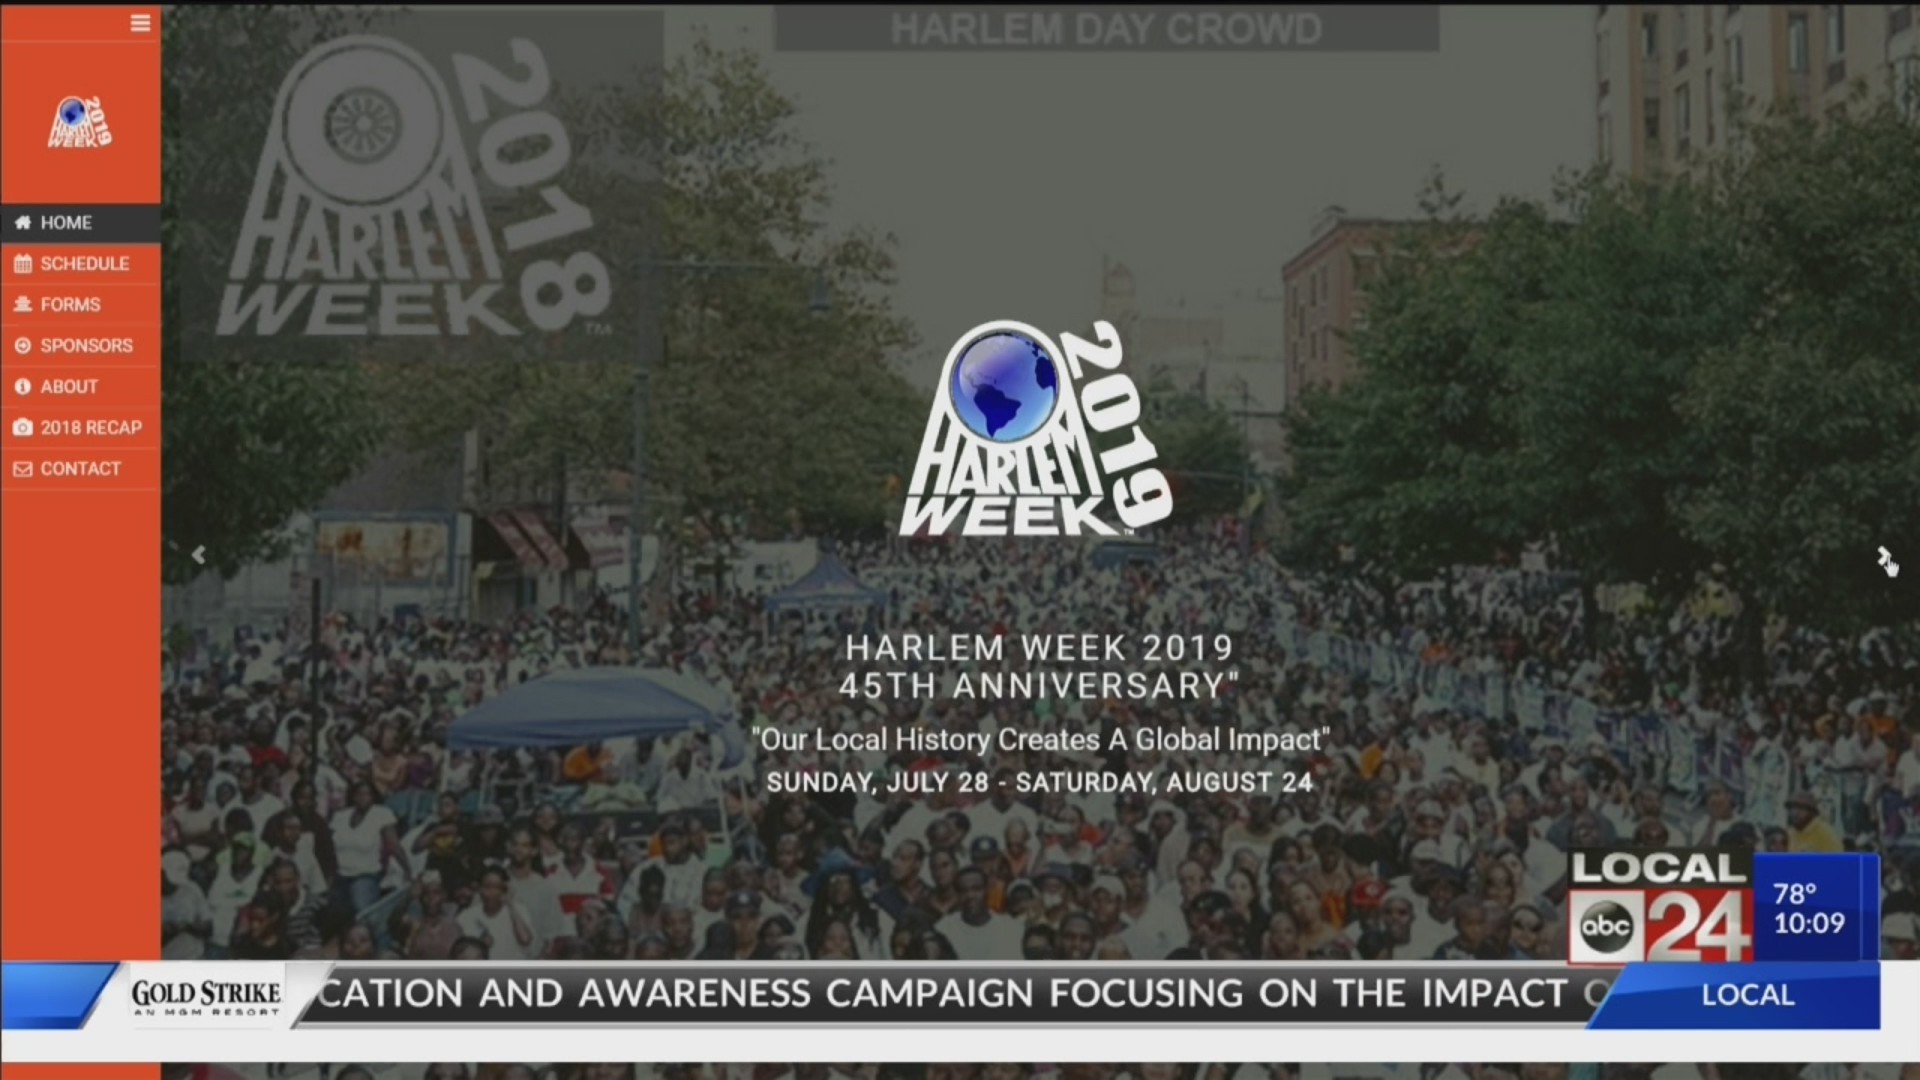 Memphis bicentennial "A New Century of Soul" to be honored during Harlem Week in New York